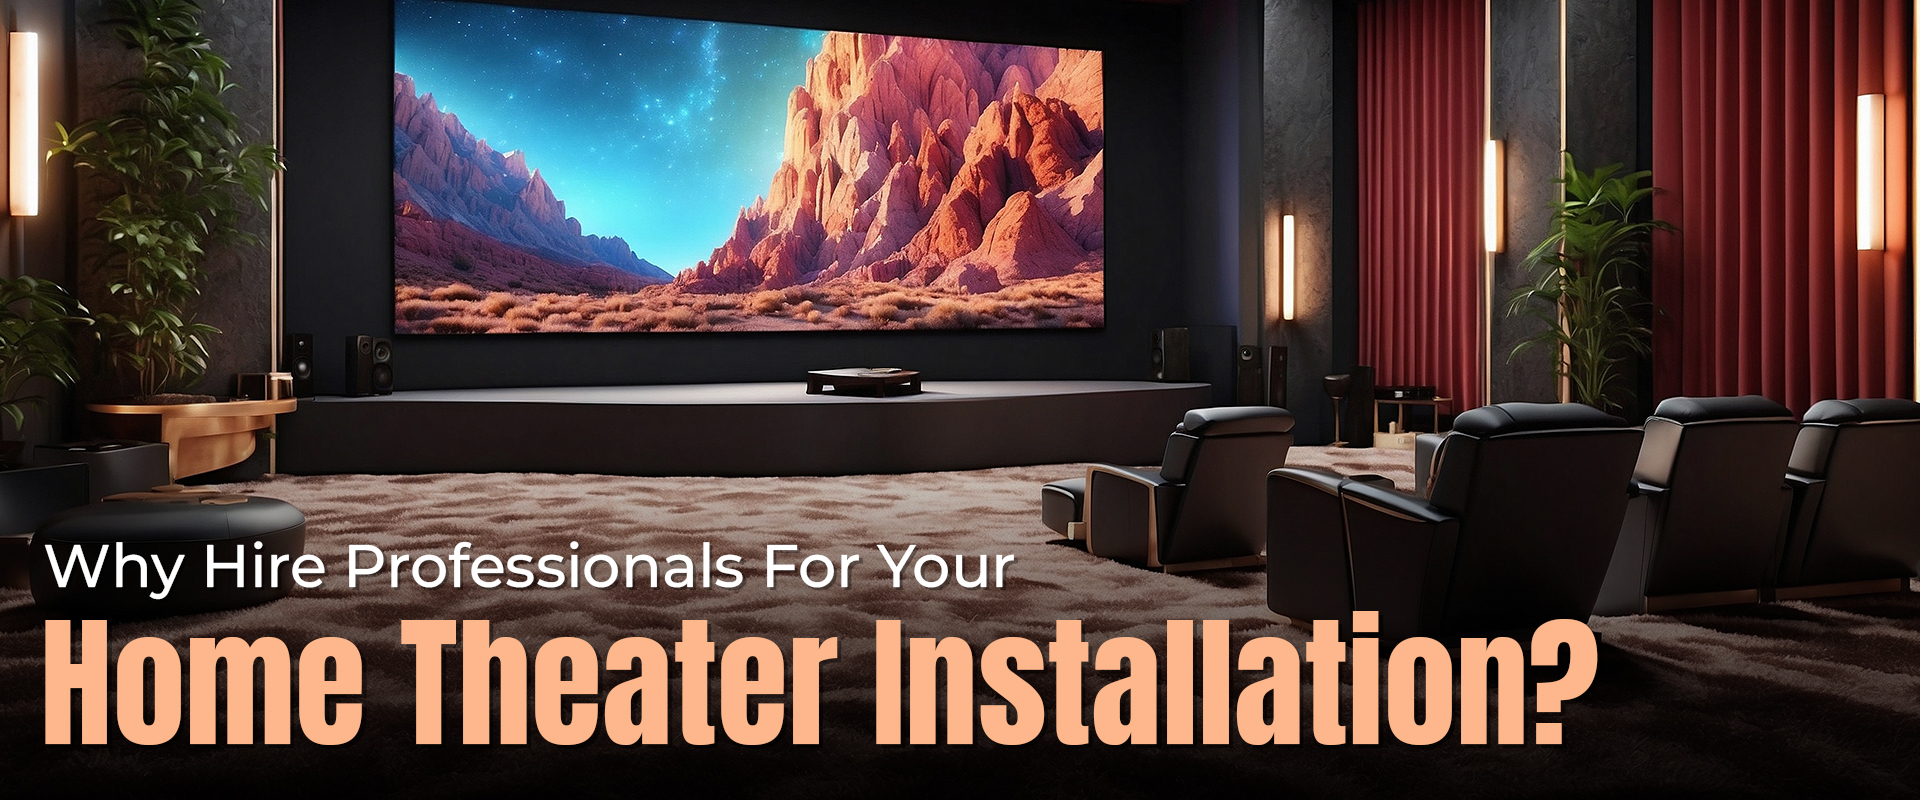 Why Hire Professionals For Your Home Theater Installation?